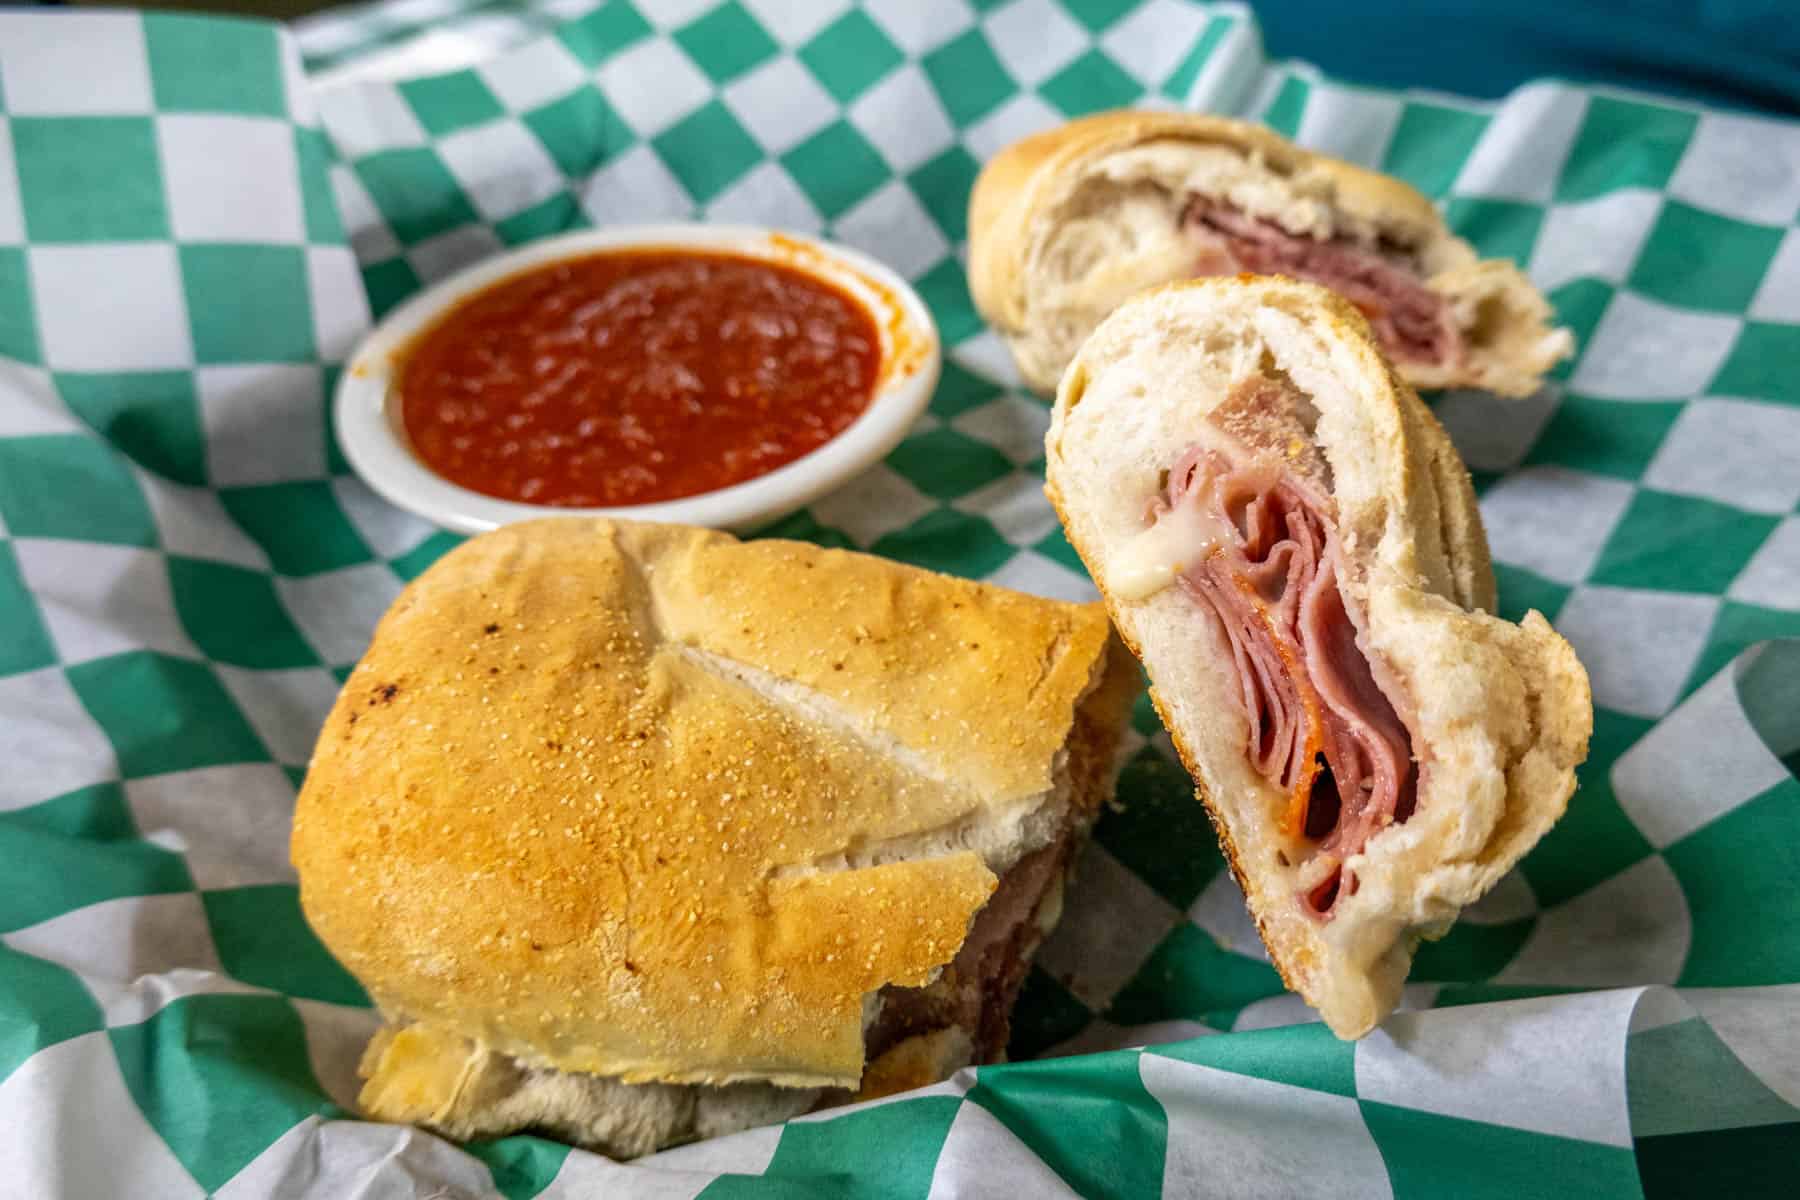 Stromboli sandwich cut open with red dipping sauce